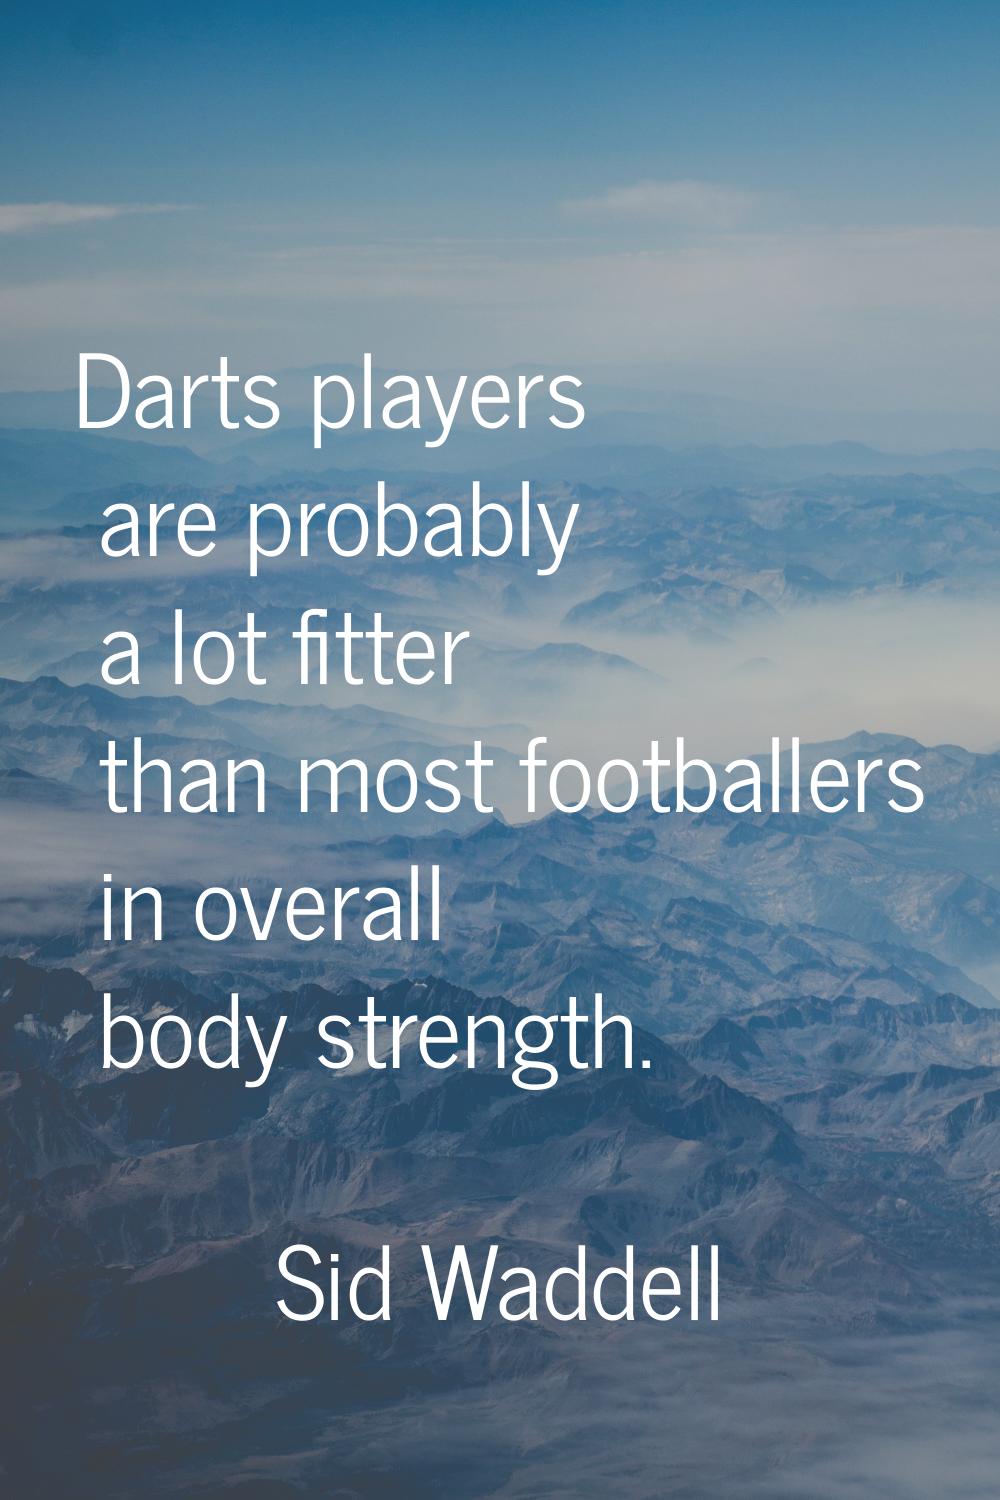 Darts players are probably a lot fitter than most footballers in overall body strength.